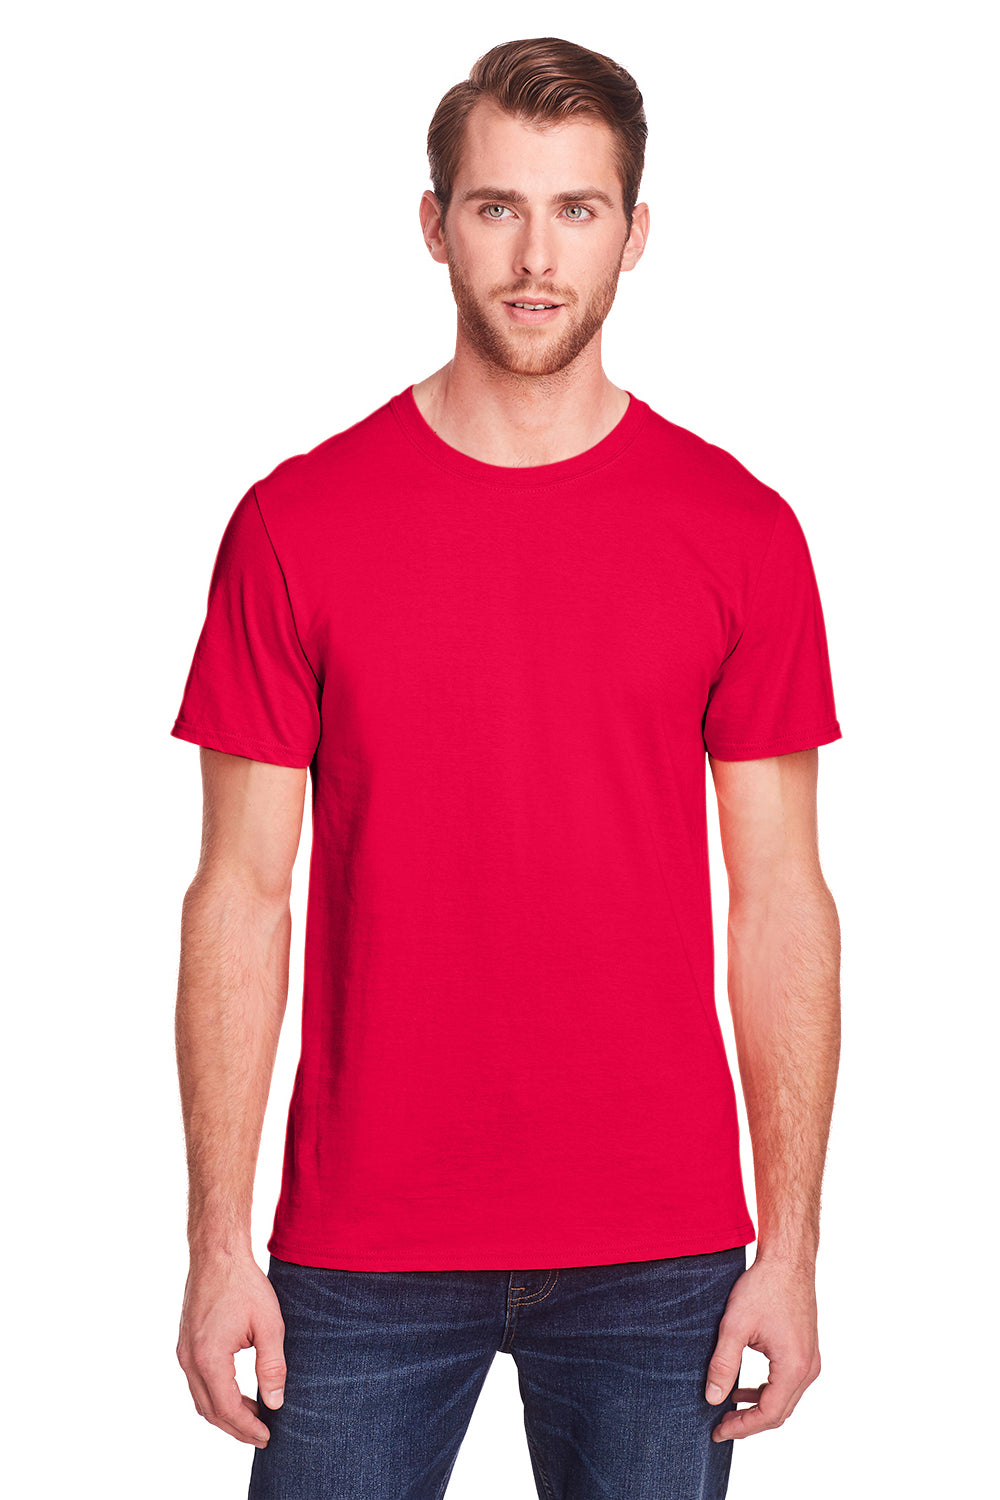 Fruit Of The Loom IC47MR Mens Iconic Short Sleeve Crewneck T-Shirt Red Front